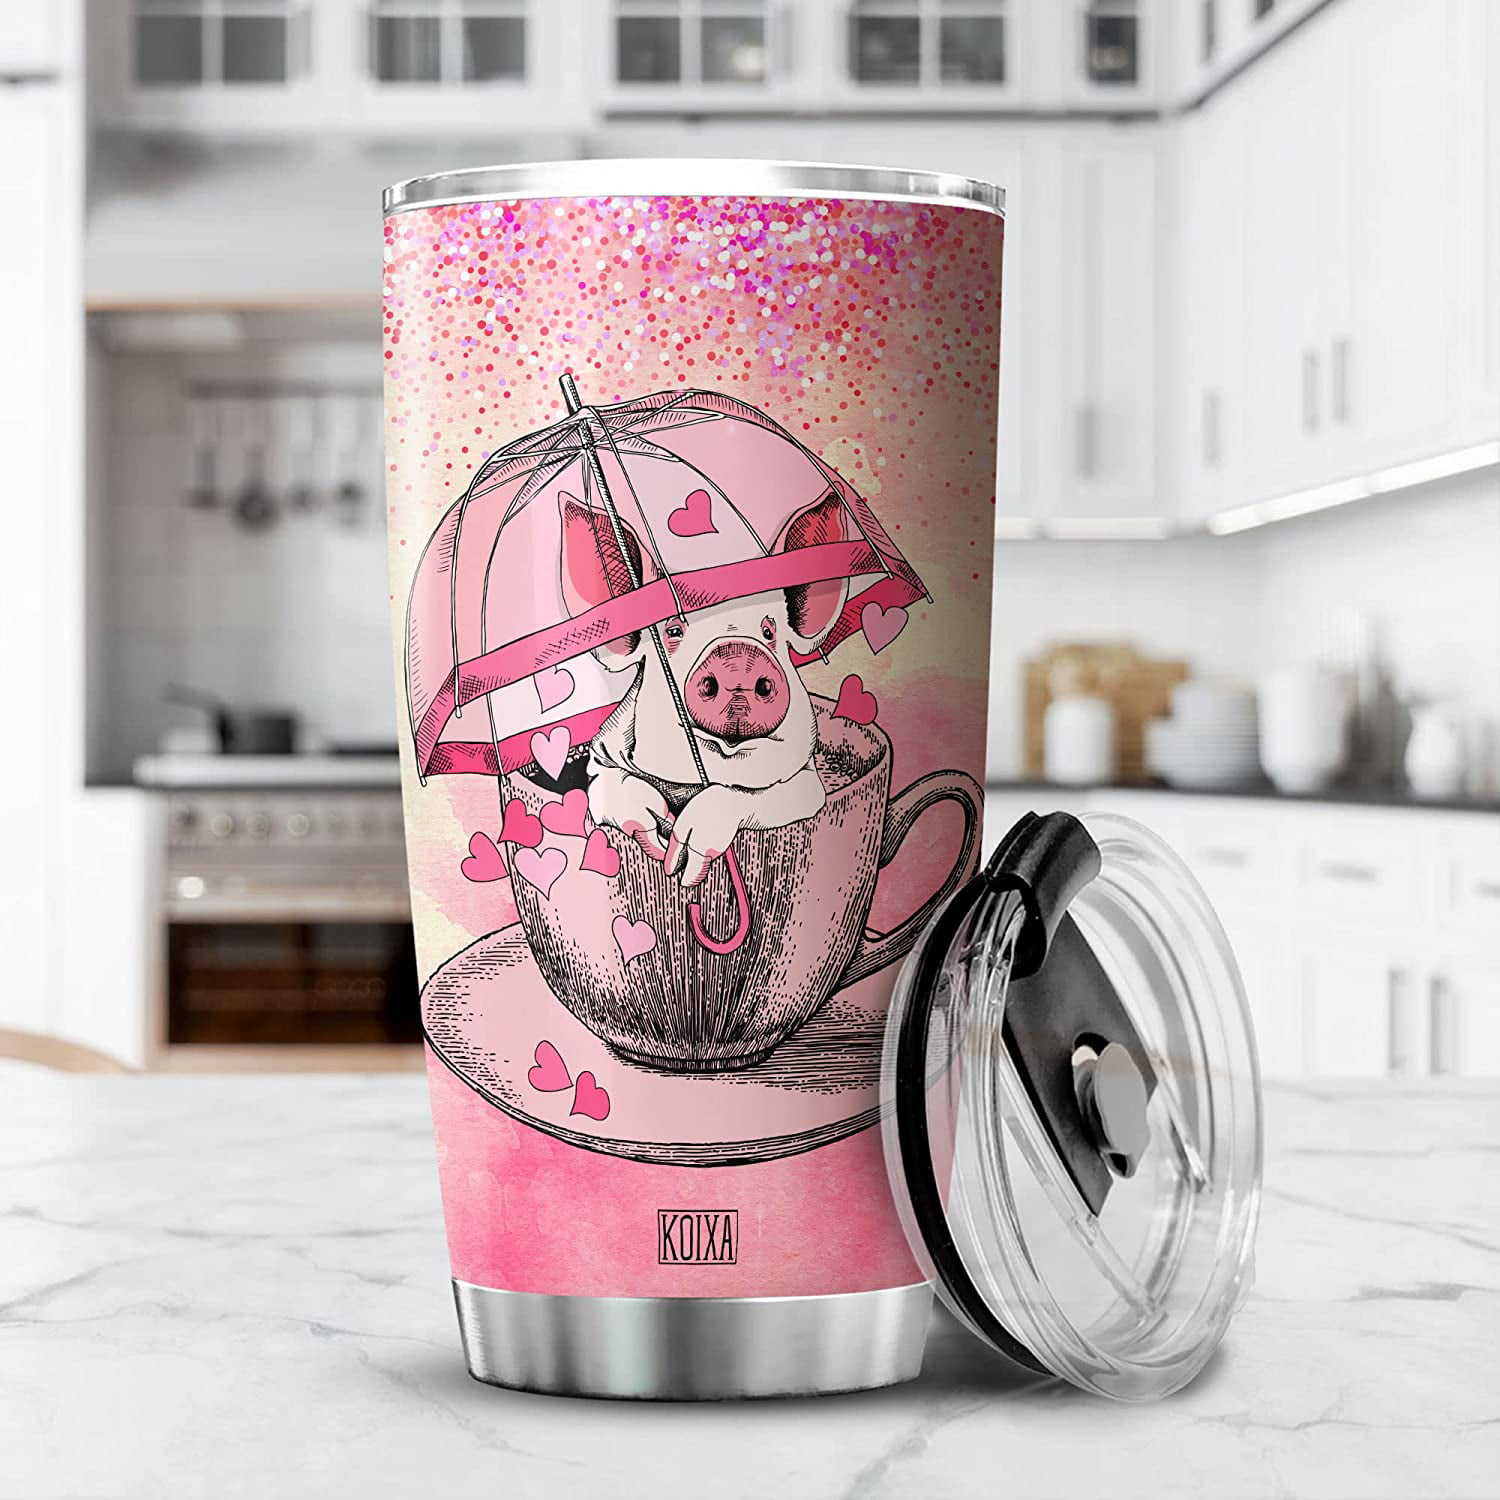 40 oz Cute Pig Tumbler with Handle and Straw Lid Leak Proof, Pigs Coffee  Travel Mug with Handle Insulated for Hot and Cold Drink Ice, Birthday Gifts  for Women Pig Lovers 